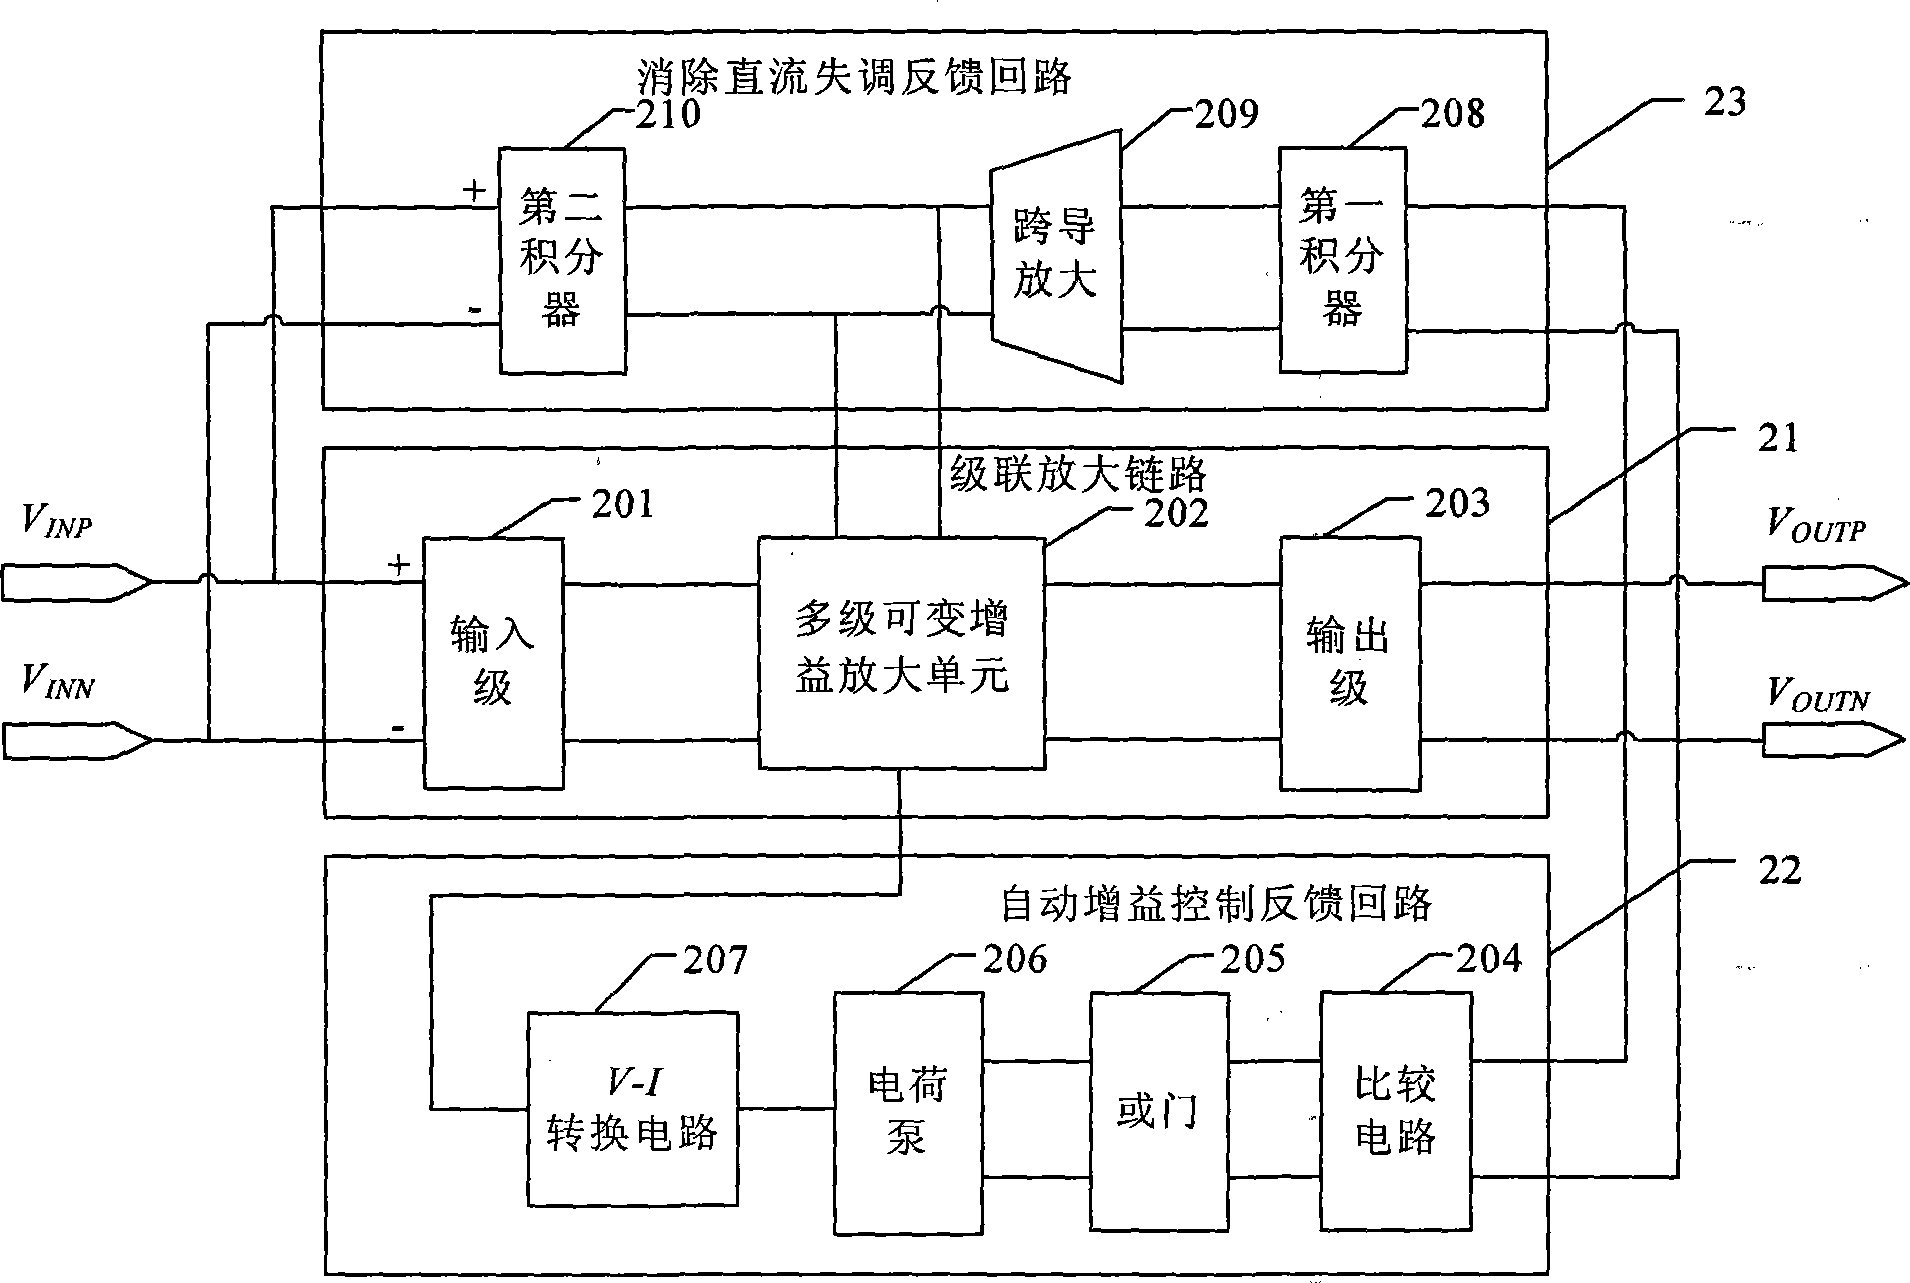 An Automatic Gain Control Amplifier for Eliminating DC Offset